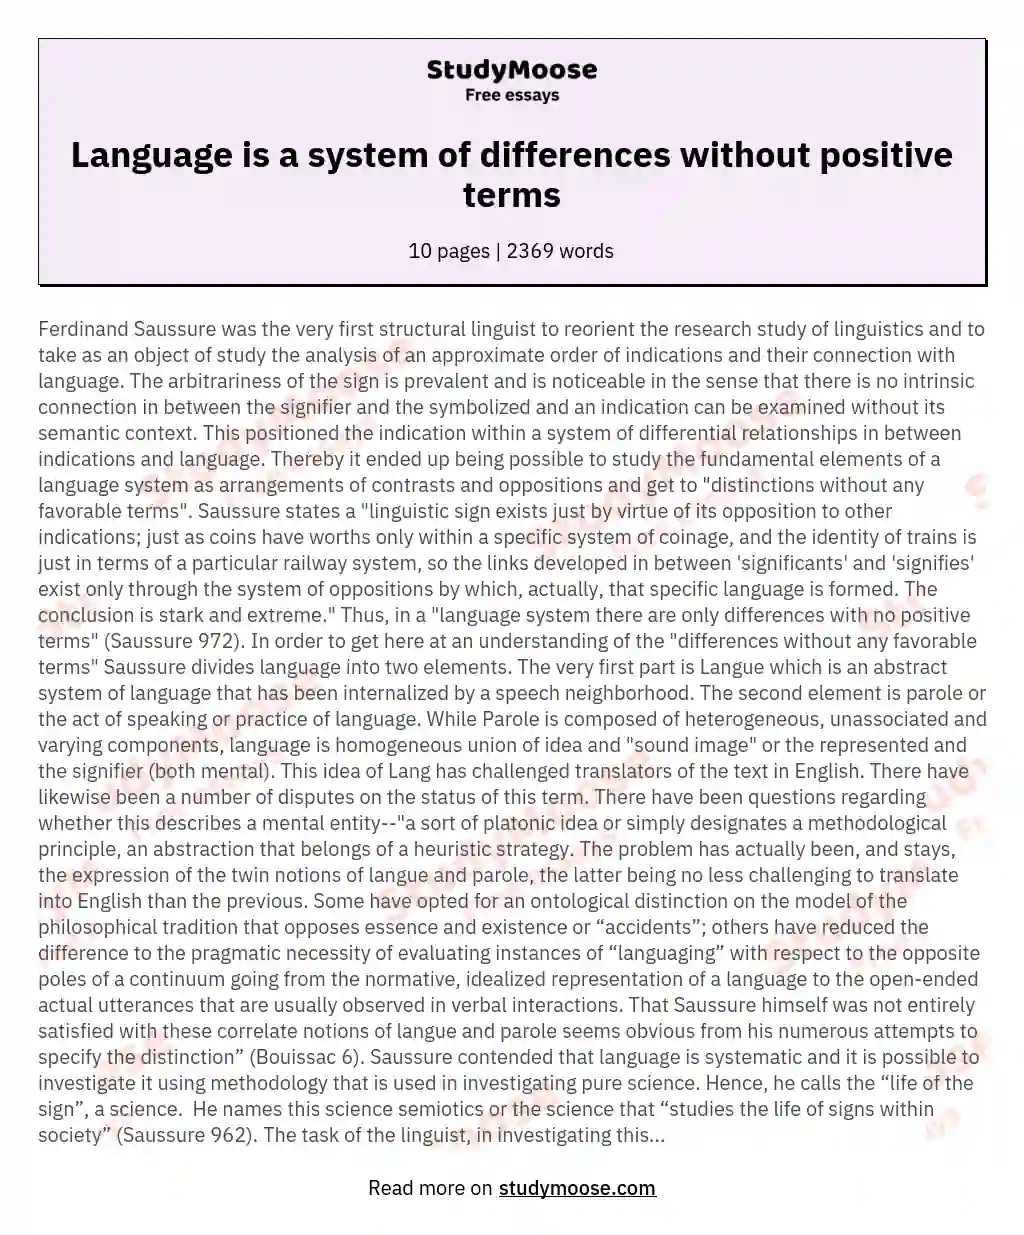 Language is a system of differences without positive terms essay